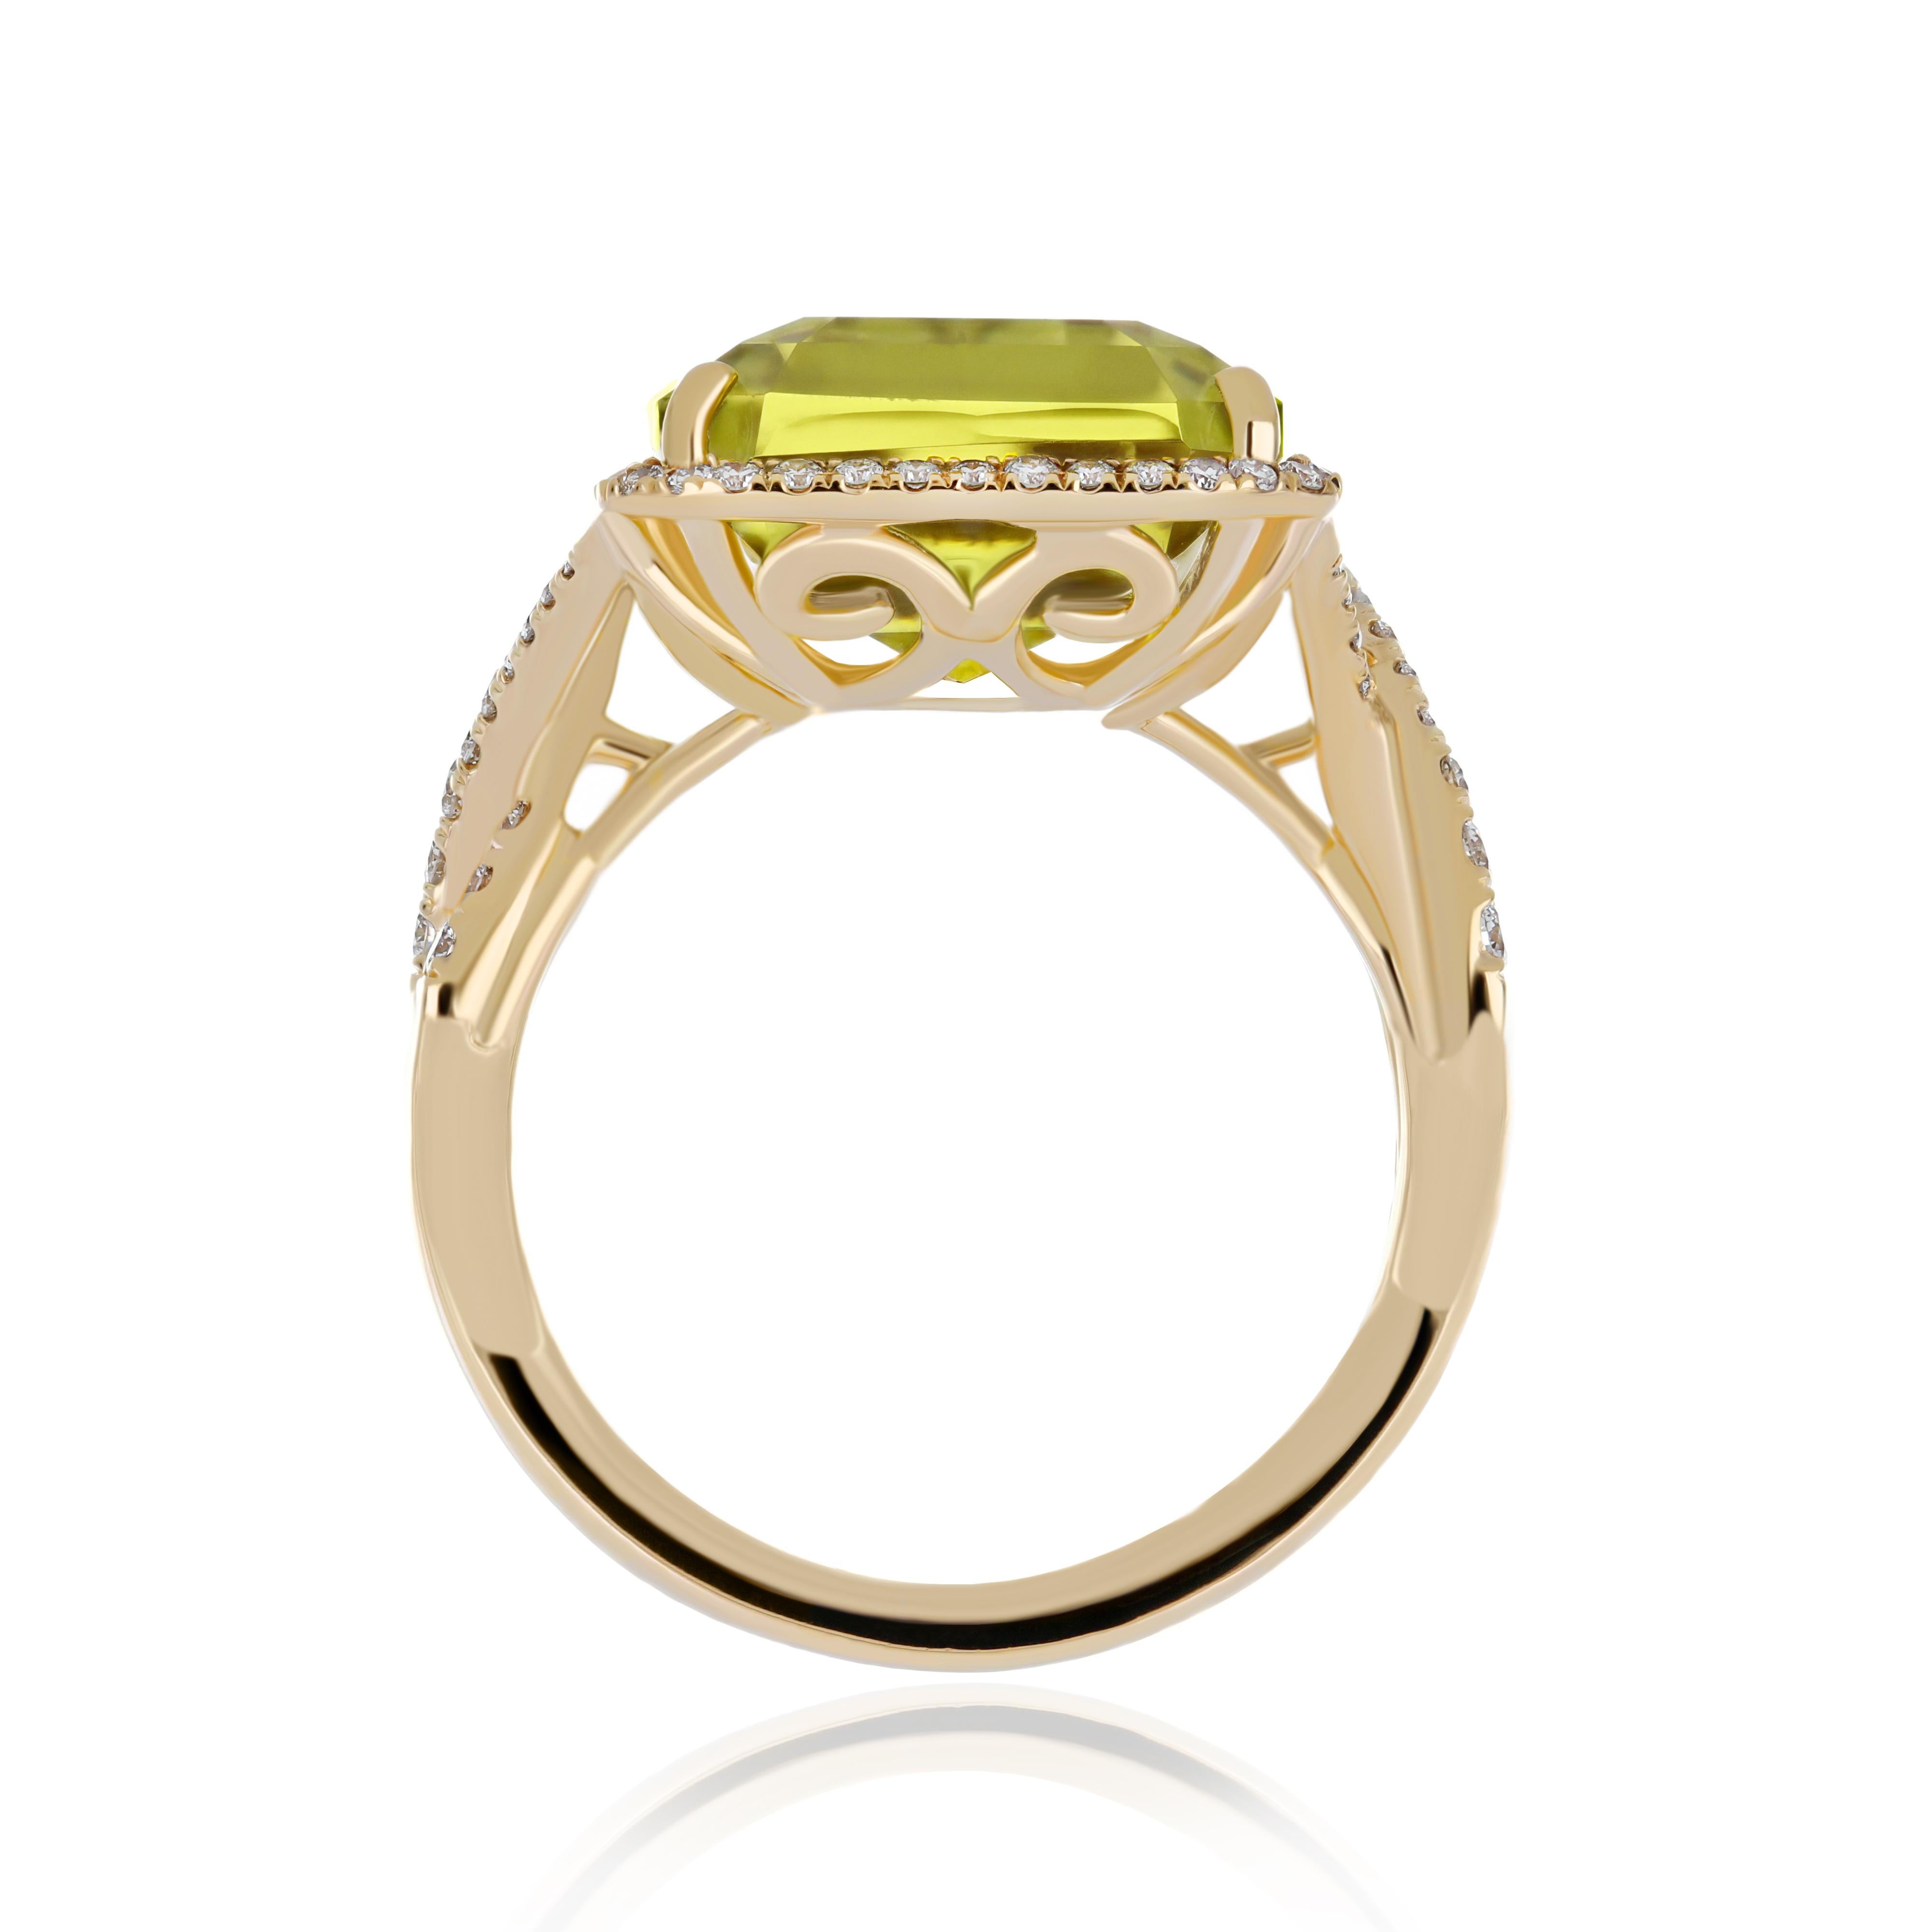 For Sale:  18.35cts Lemon Citrine and Diamond 14 Karat Yellow Gold Ring for New Year Gift  5